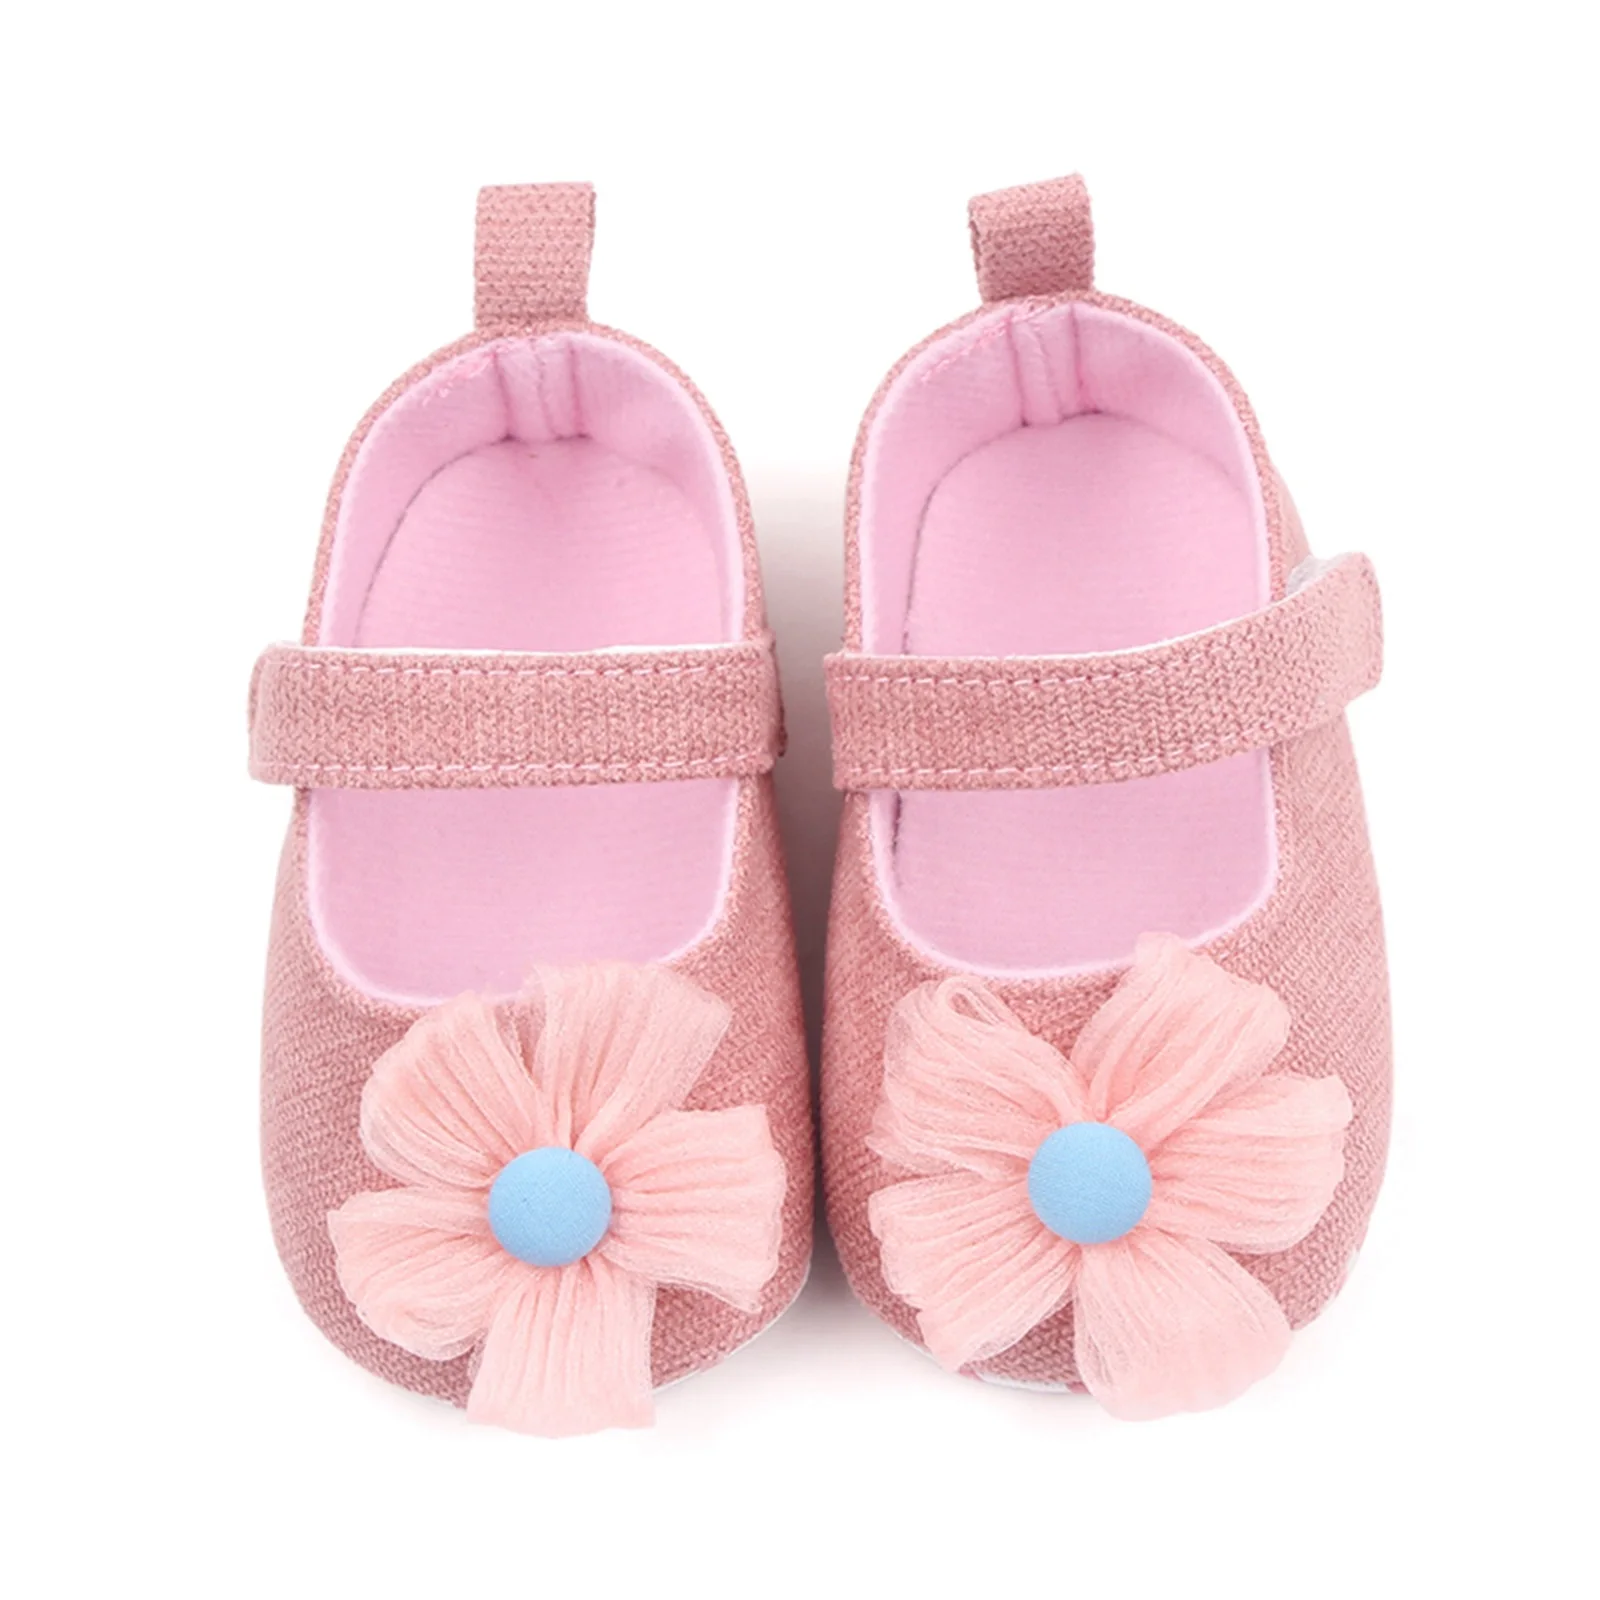 

Baby Girls Princess Shoes Premium Flats Rubber Sole Infant Flower PU Leather Toddler First Walker Crib Shoe For Newborns